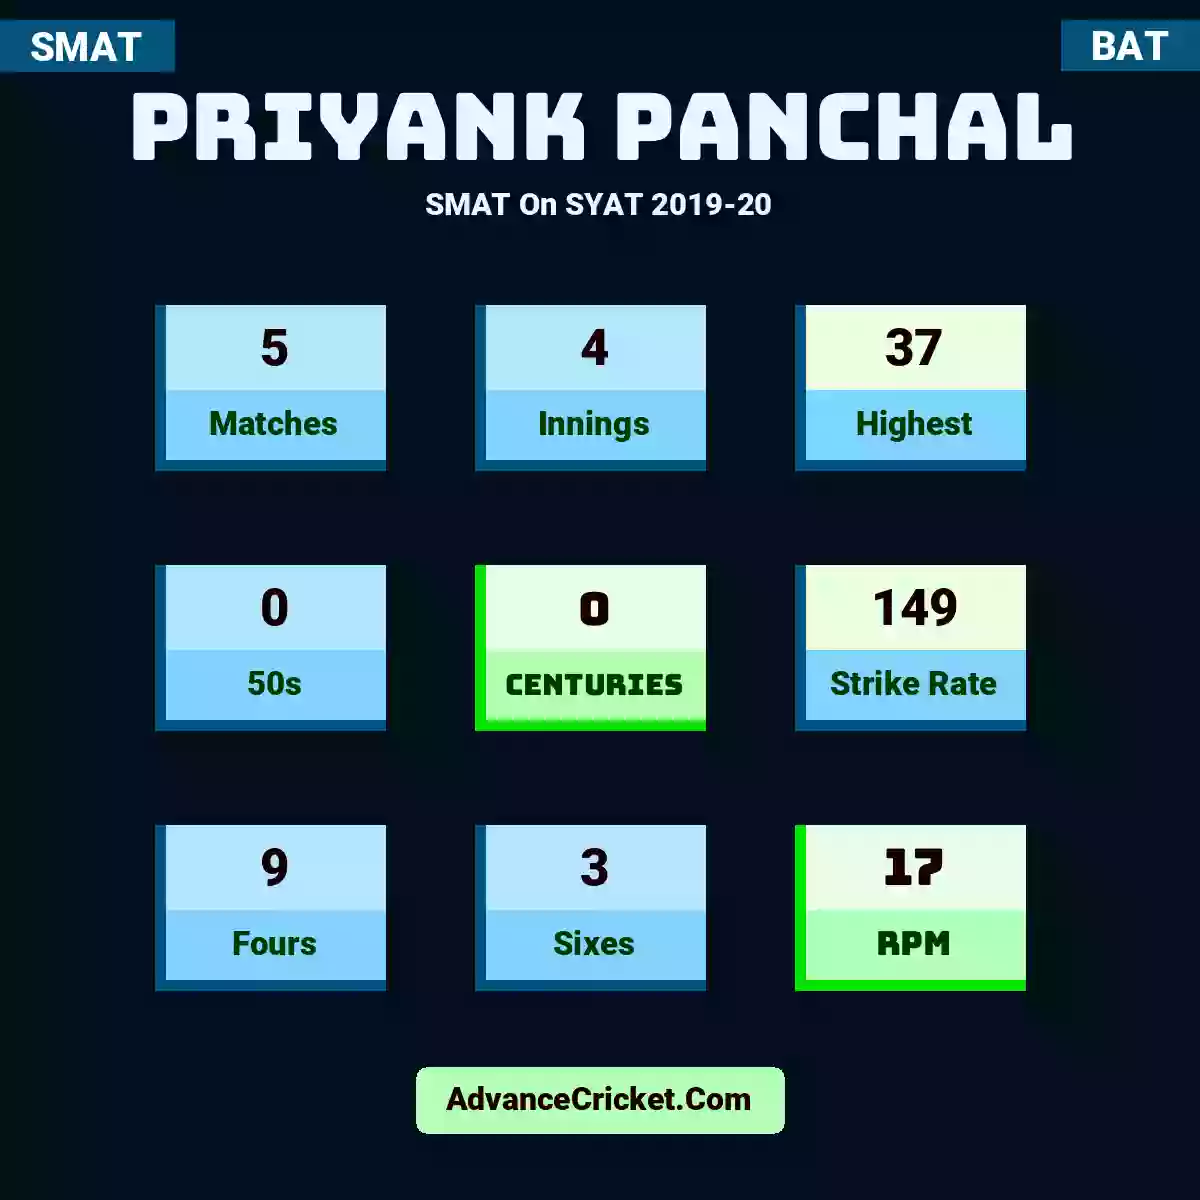 Priyank Panchal SMAT  On SYAT 2019-20, Priyank Panchal played 5 matches, scored 37 runs as highest, 0 half-centuries, and 0 centuries, with a strike rate of 149. P.Panchal hit 9 fours and 3 sixes, with an RPM of 17.